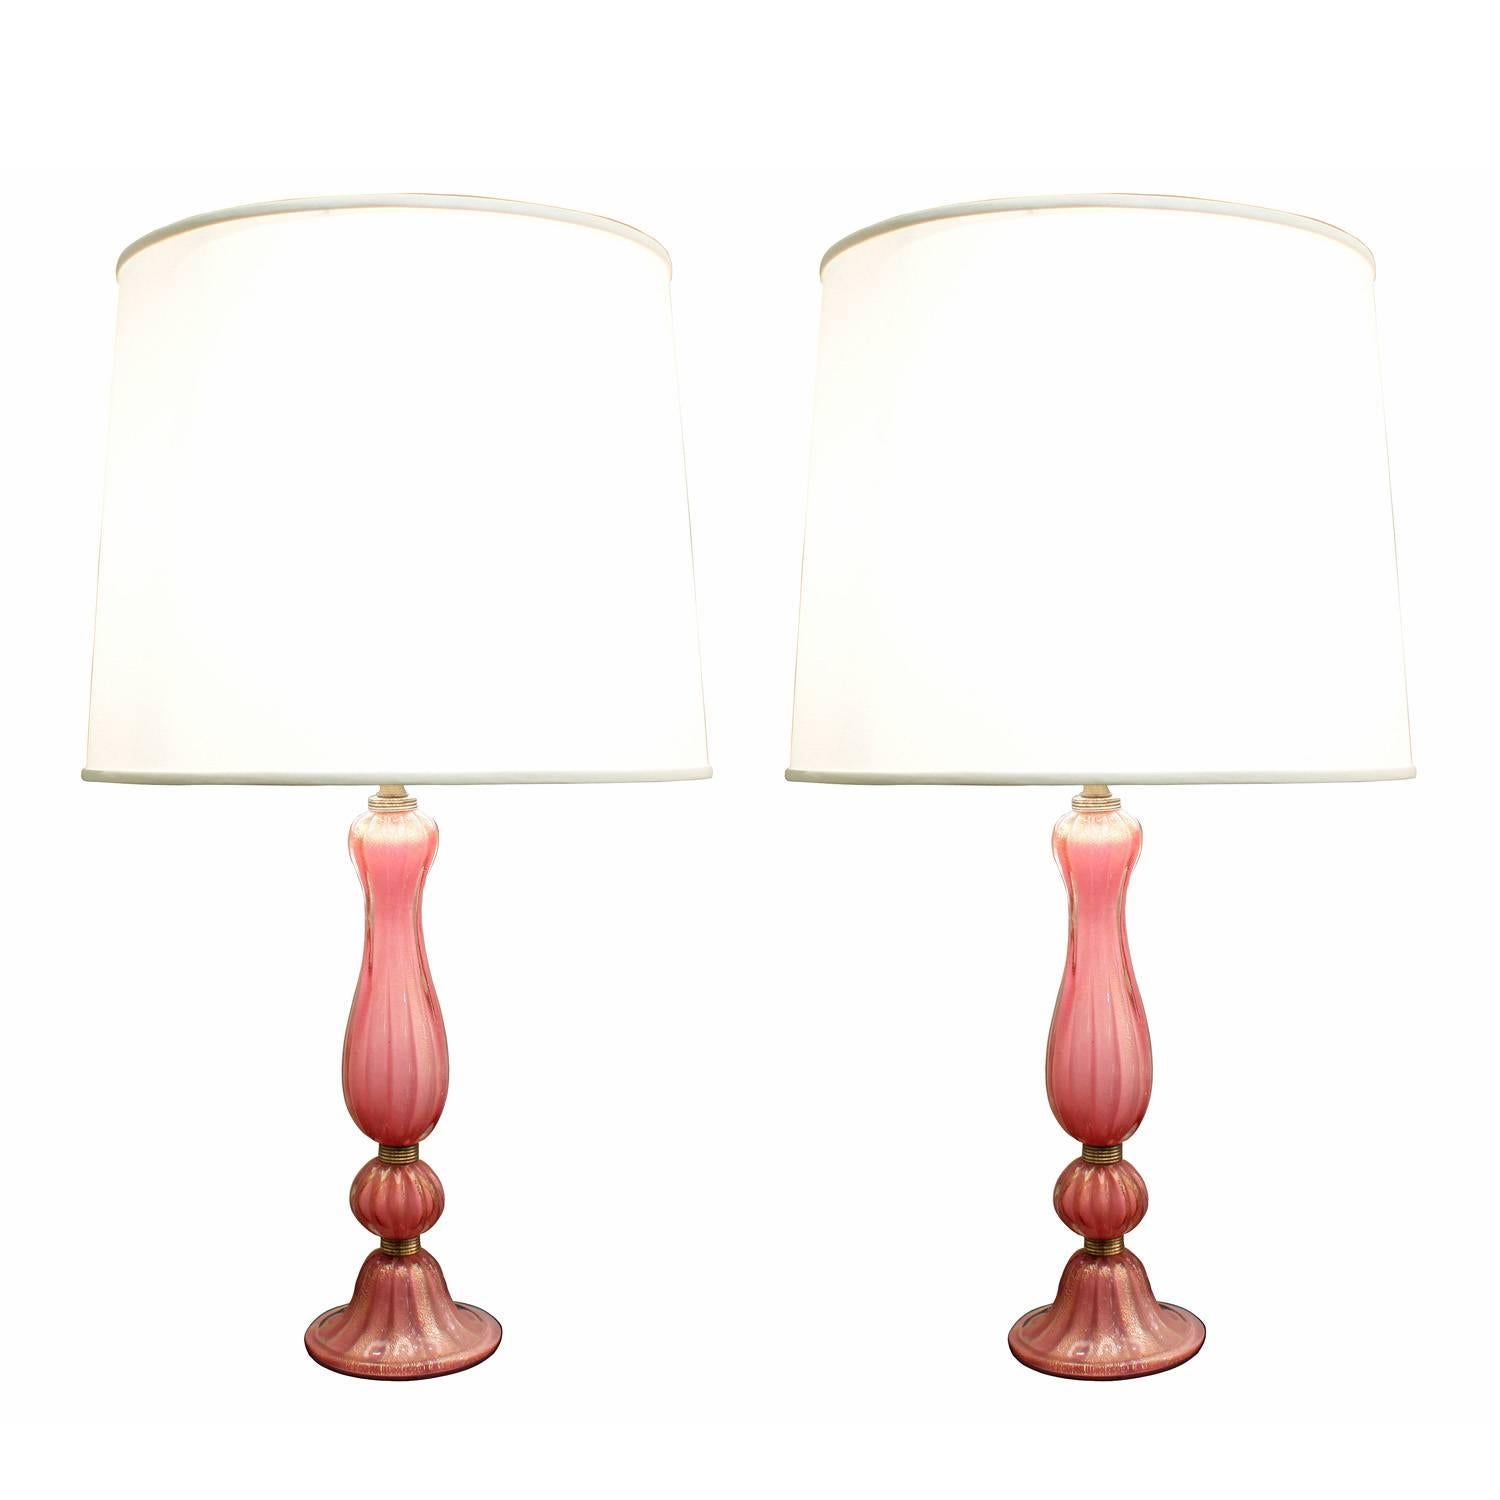 Pair of Exceptional Handblown Glass Table Lamps by Barovier & Toso